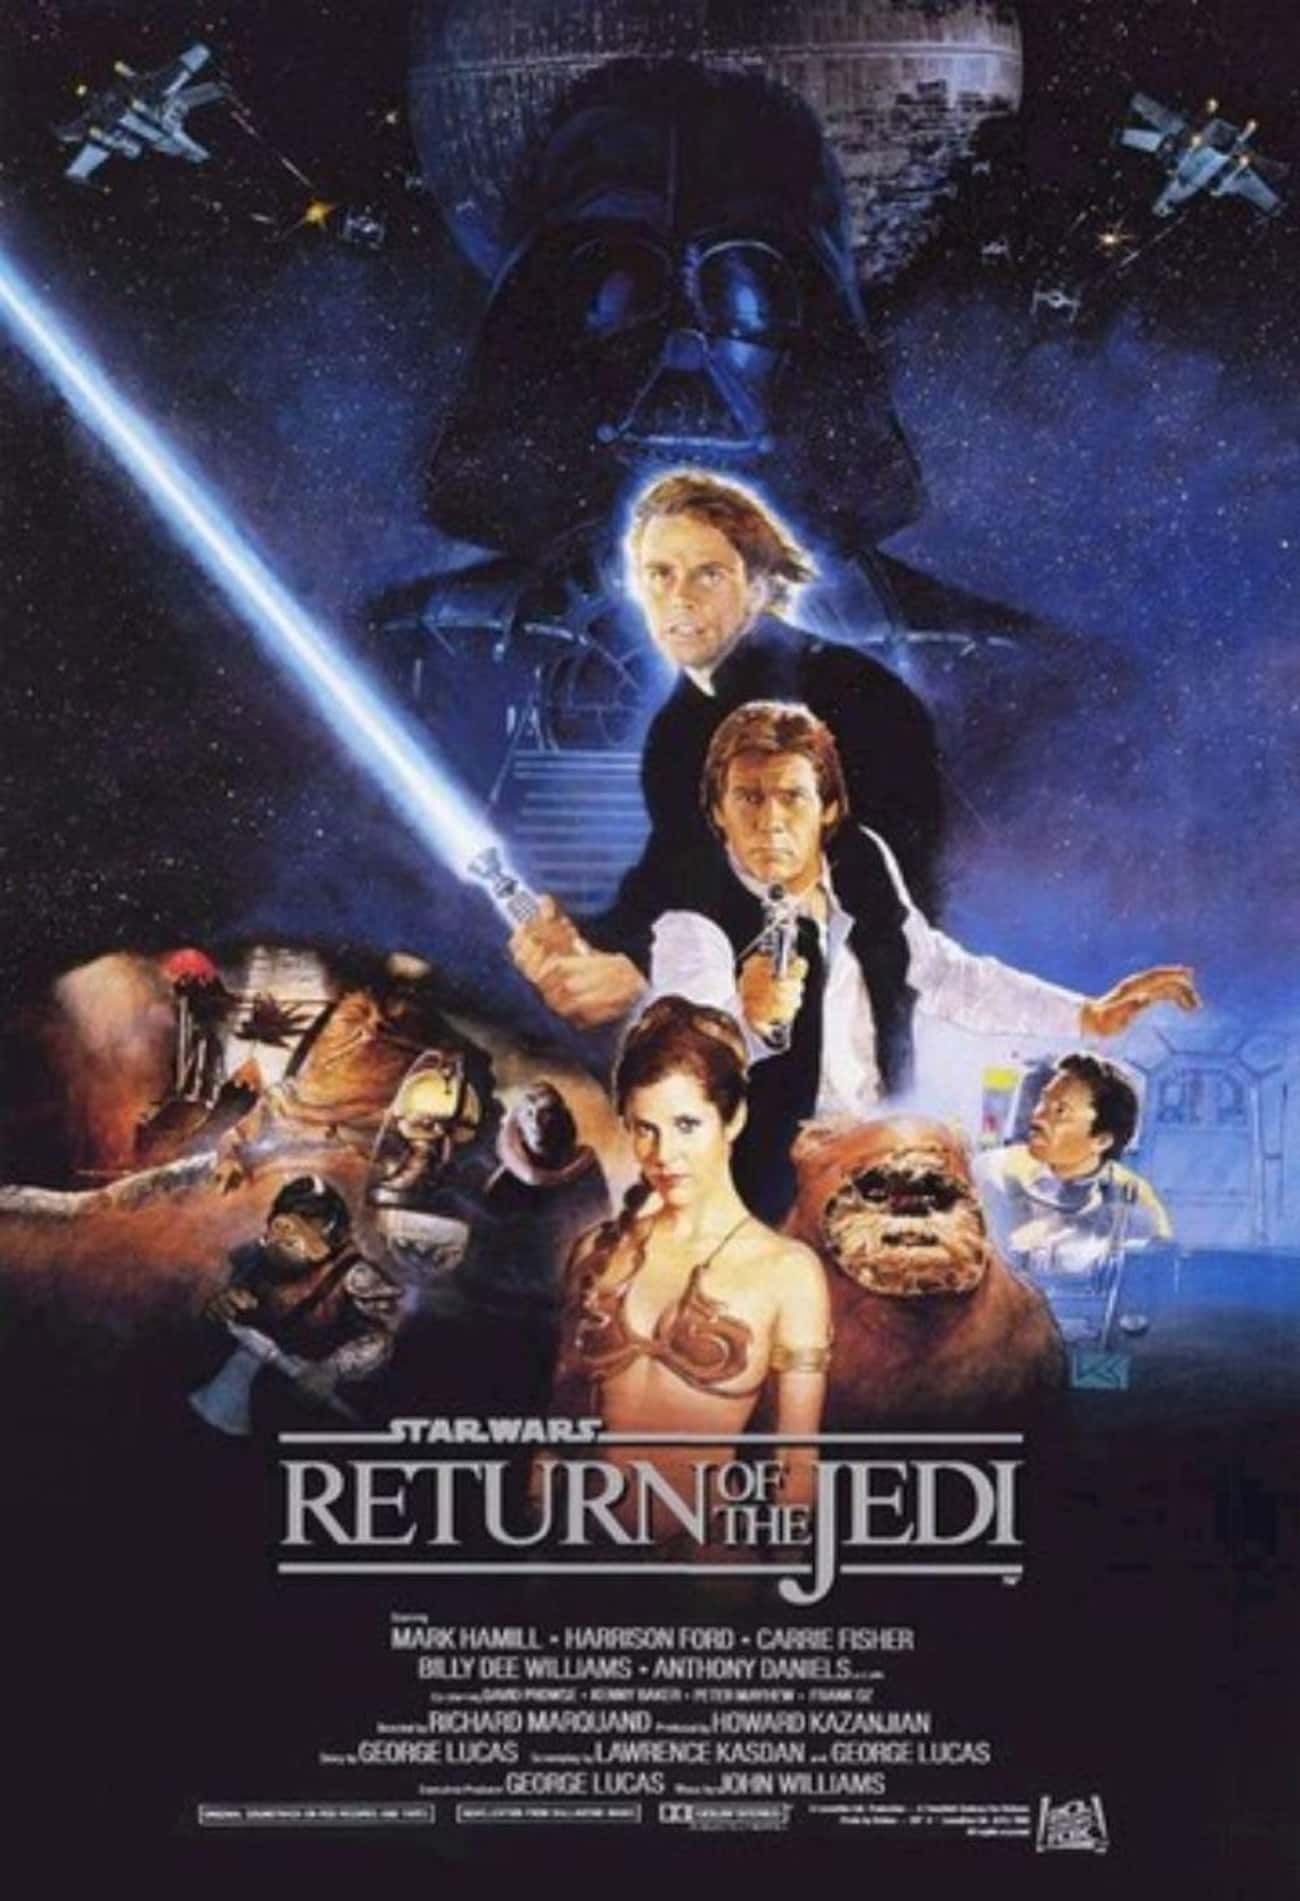 Retun of the Jedi style b theatrical release poster